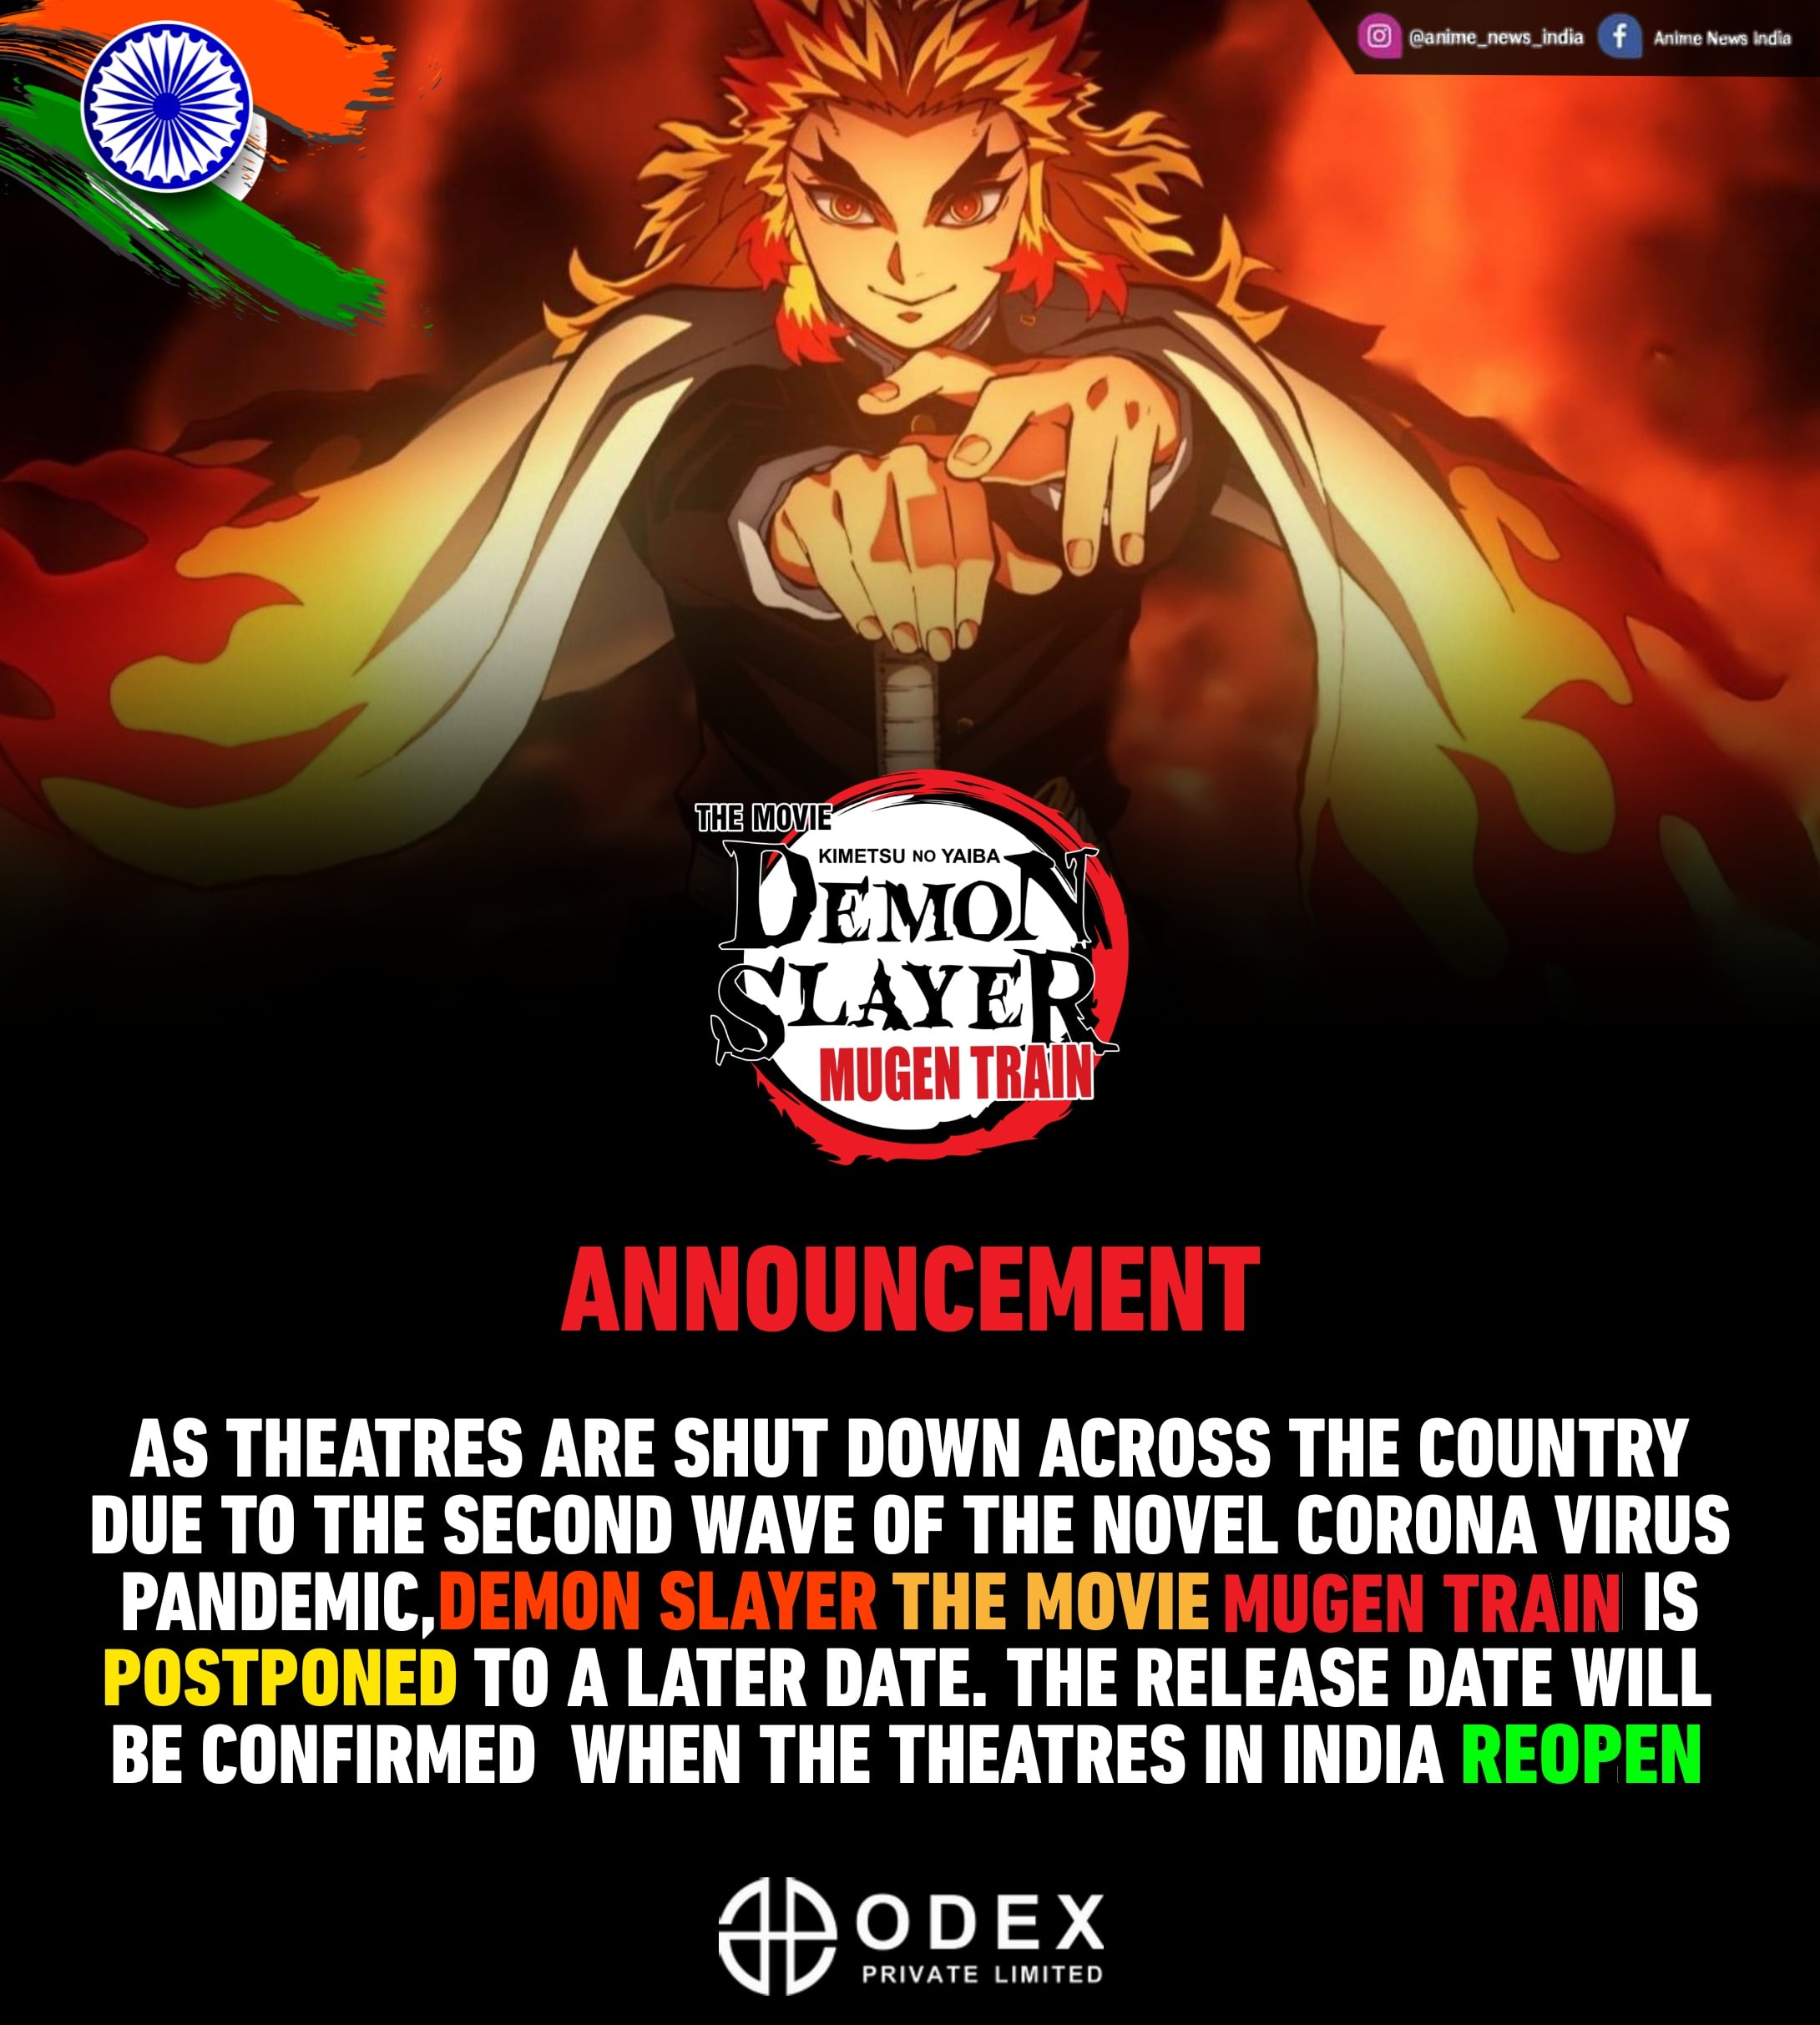 The Release Date of Demon Slayer The Movie : Mugen Train Got Postponed in India